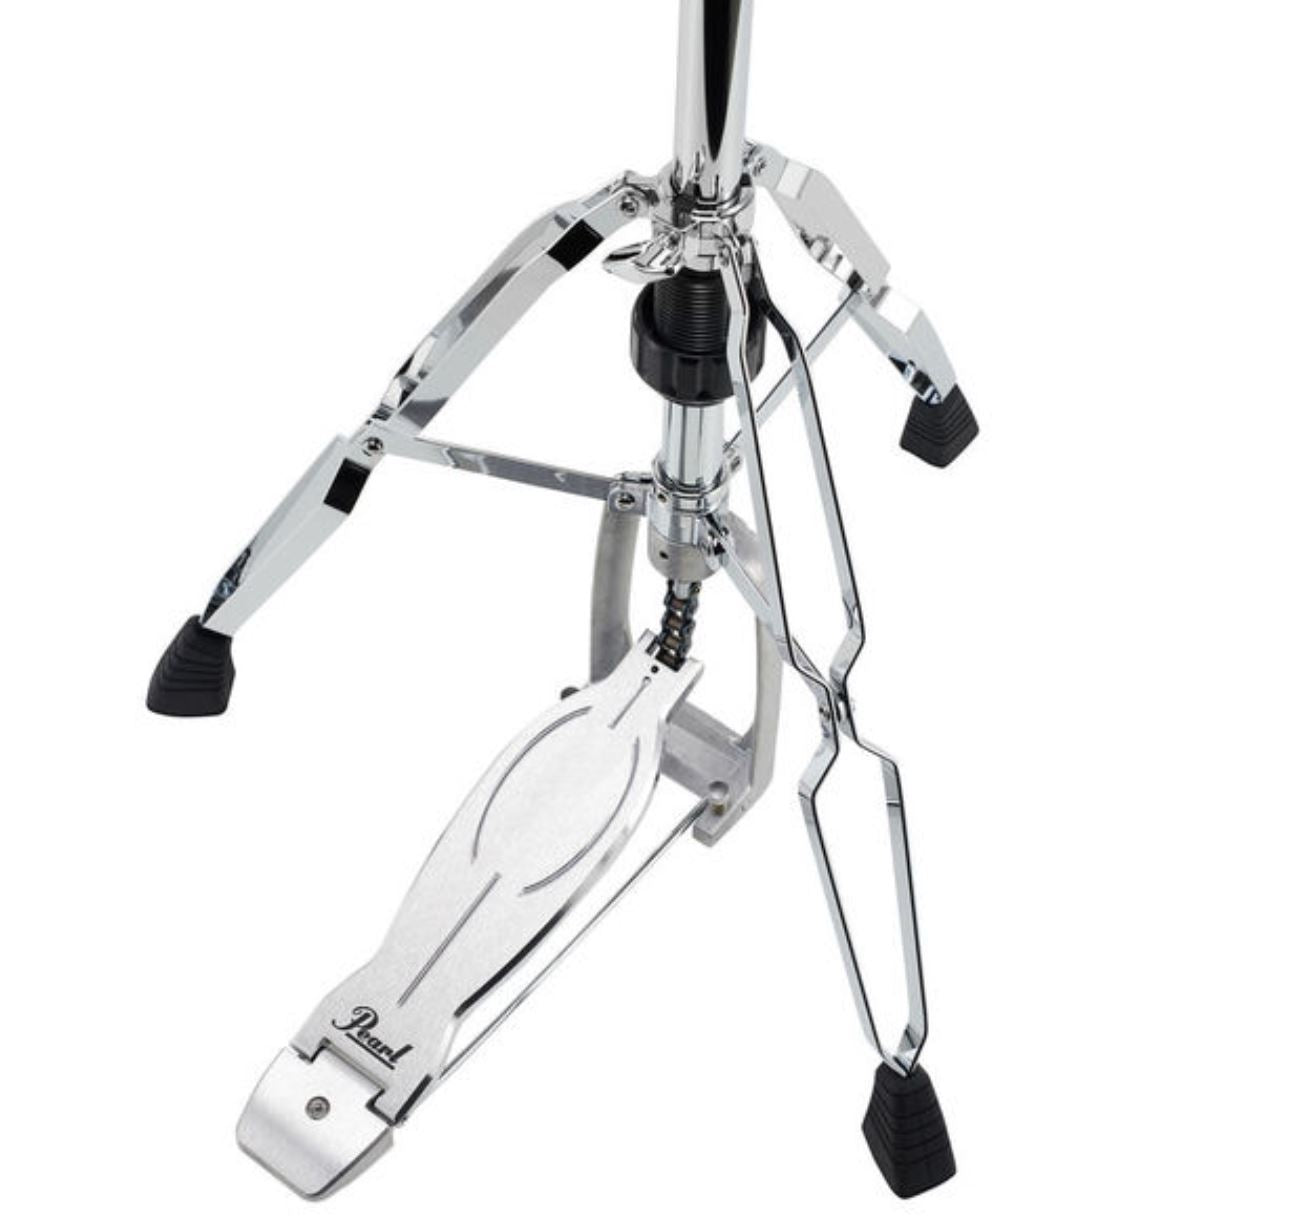 Pearl H1030 Double-Braced Hi-Hat Cymbal Stand with 760mm-940mm Height Range Swiveling Legs Footboard